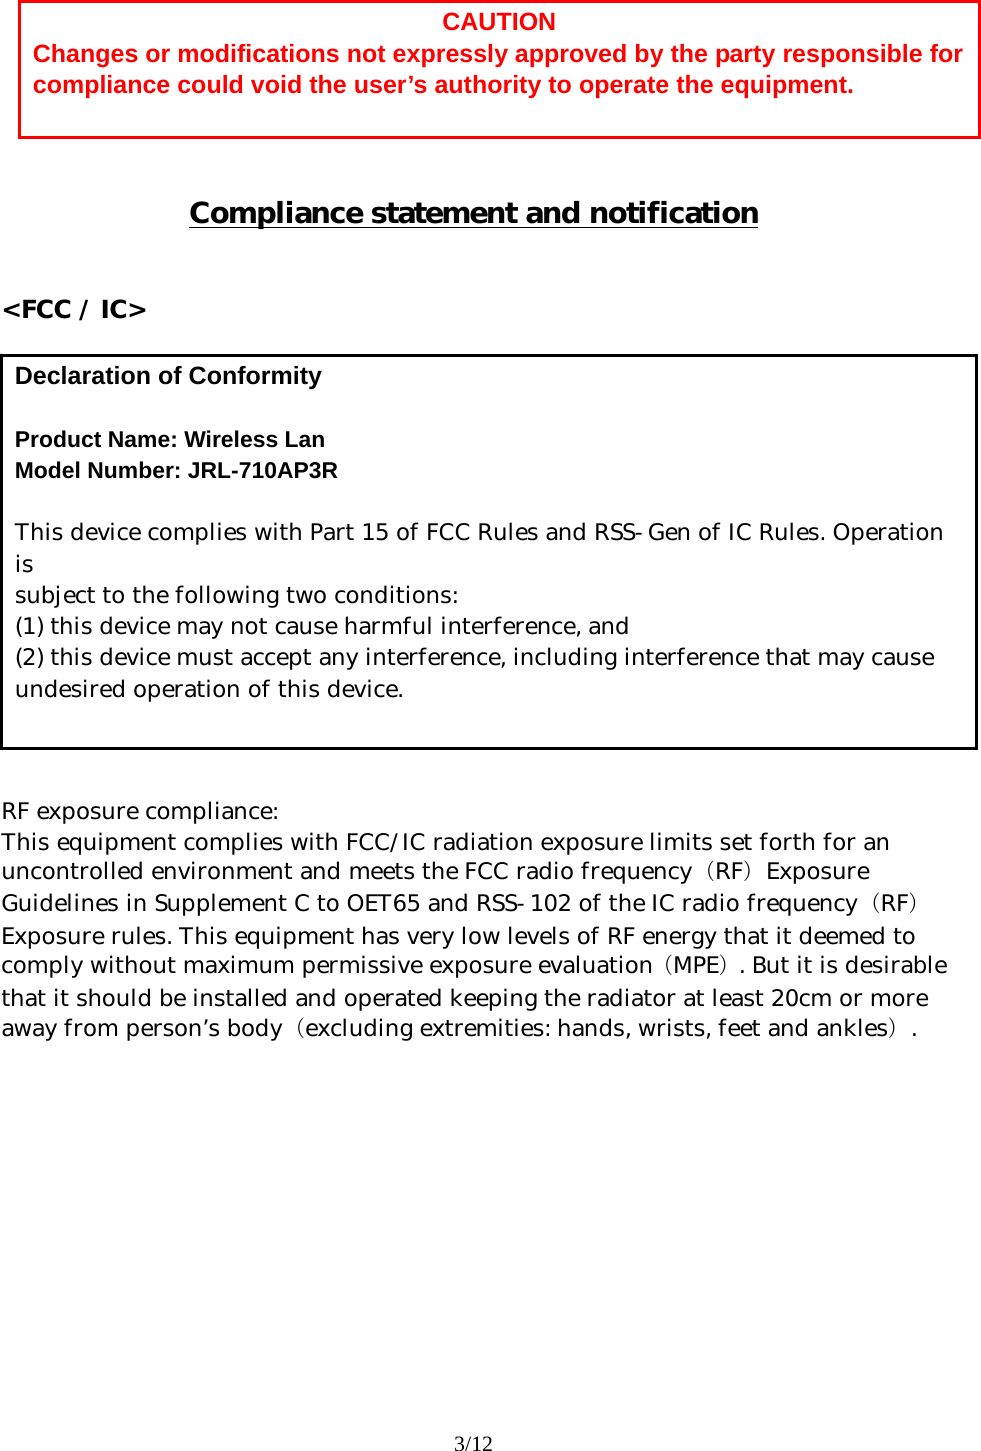 3/12         Compliance statement and notification   &lt;FCC / IC&gt;                RF exposure compliance: This equipment complies with FCC/IC radiation exposure limits set forth for an uncontrolled environment and meets the FCC radio frequency（RF）Exposure Guidelines in Supplement C to OET65 and RSS-102 of the IC radio frequency（RF）Exposure rules. This equipment has very low levels of RF energy that it deemed to comply without maximum permissive exposure evaluation（MPE）. But it is desirable that it should be installed and operated keeping the radiator at least 20cm or more away from person’s body（excluding extremities: hands, wrists, feet and ankles）.   CAUTION Changes or modifications not expressly approved by the party responsible for compliance could void the user’s authority to operate the equipment. Declaration of Conformity  Product Name: Wireless Lan Model Number: JRL-710AP3R  This device complies with Part 15 of FCC Rules and RSS-Gen of IC Rules. Operation is  subject to the following two conditions:  (1) this device may not cause harmful interference, and   (2) this device must accept any interference, including interference that may cause undesired operation of this device.  